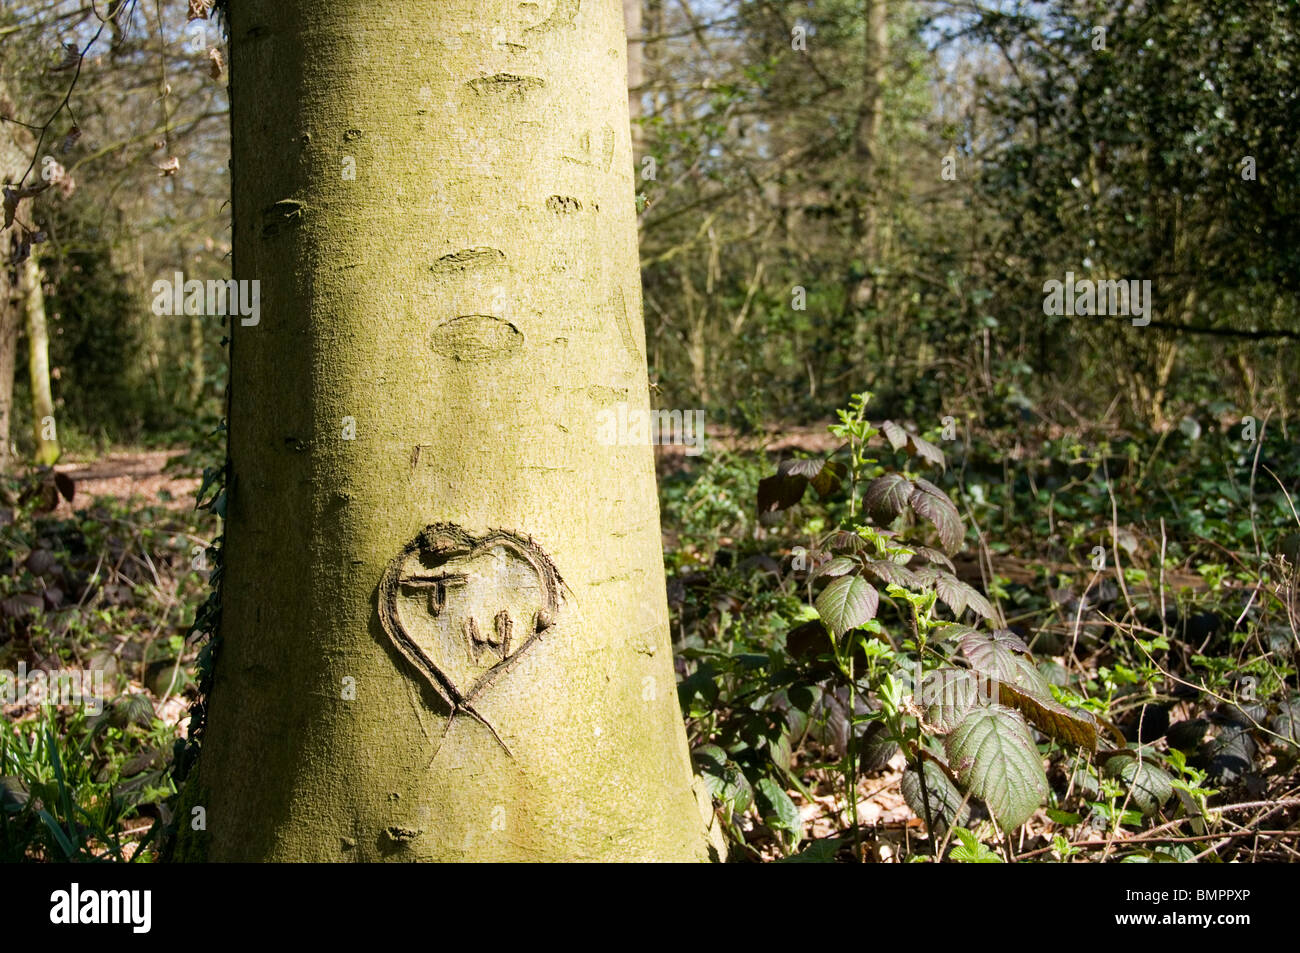 A heart and initials T W carved on a tree trunk in Ravensbourne Woods, South London, England Stock Photo